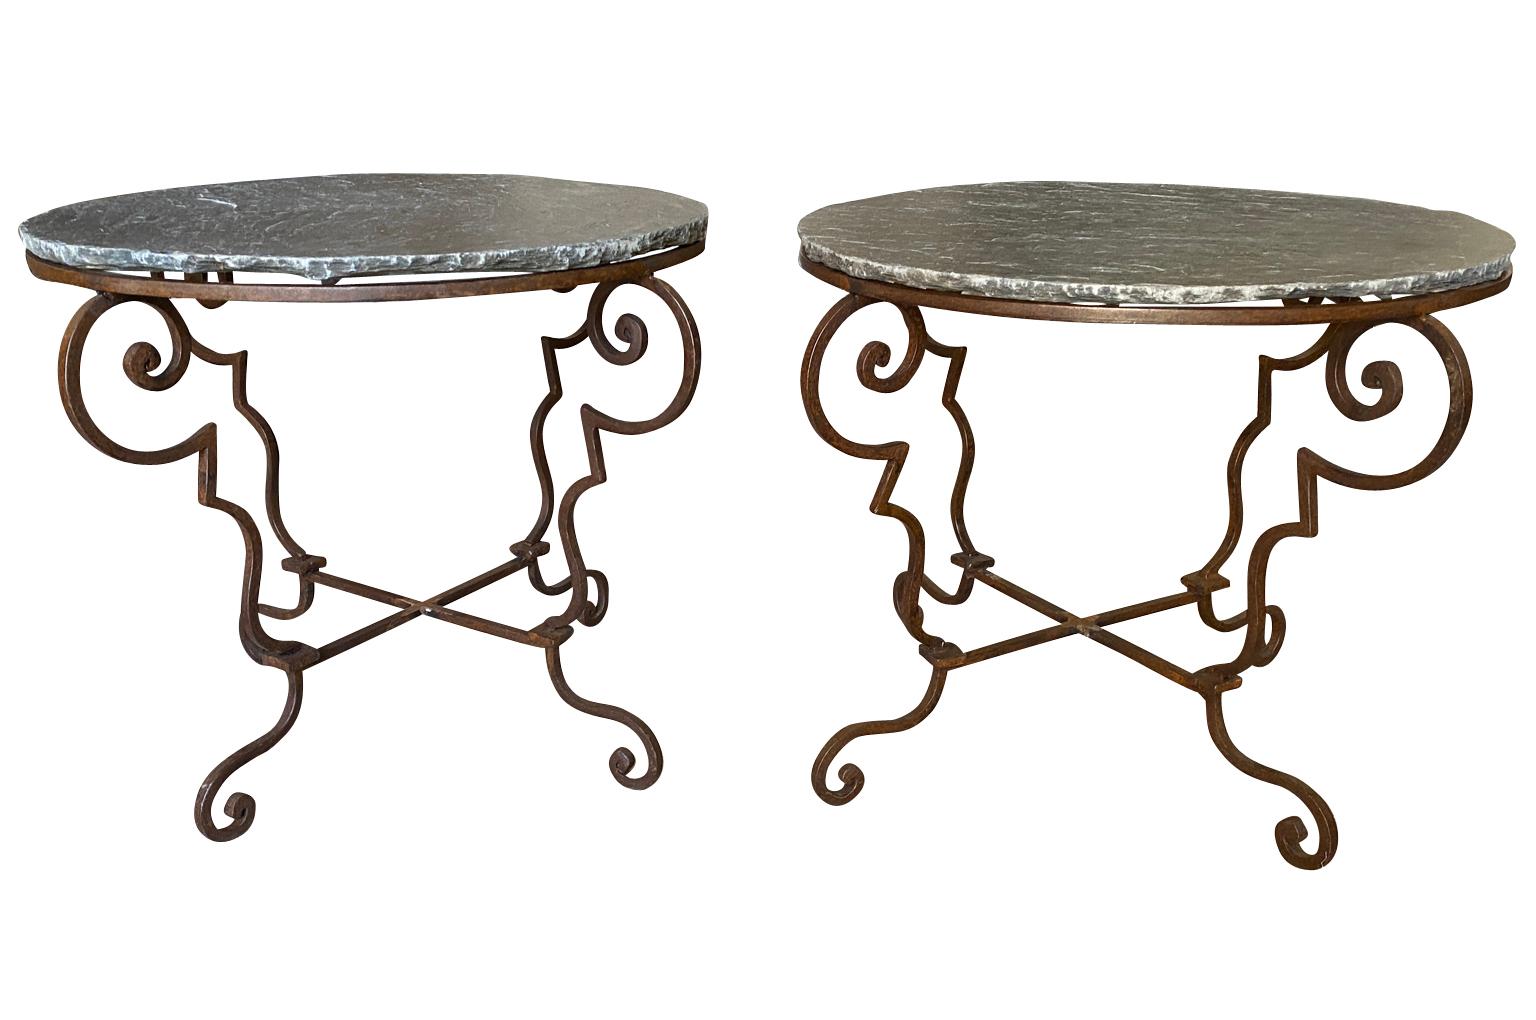 A charming pair of early 20th century side tables from the South of France. Wonderfully constructed with wrought iron bases and slate tops.